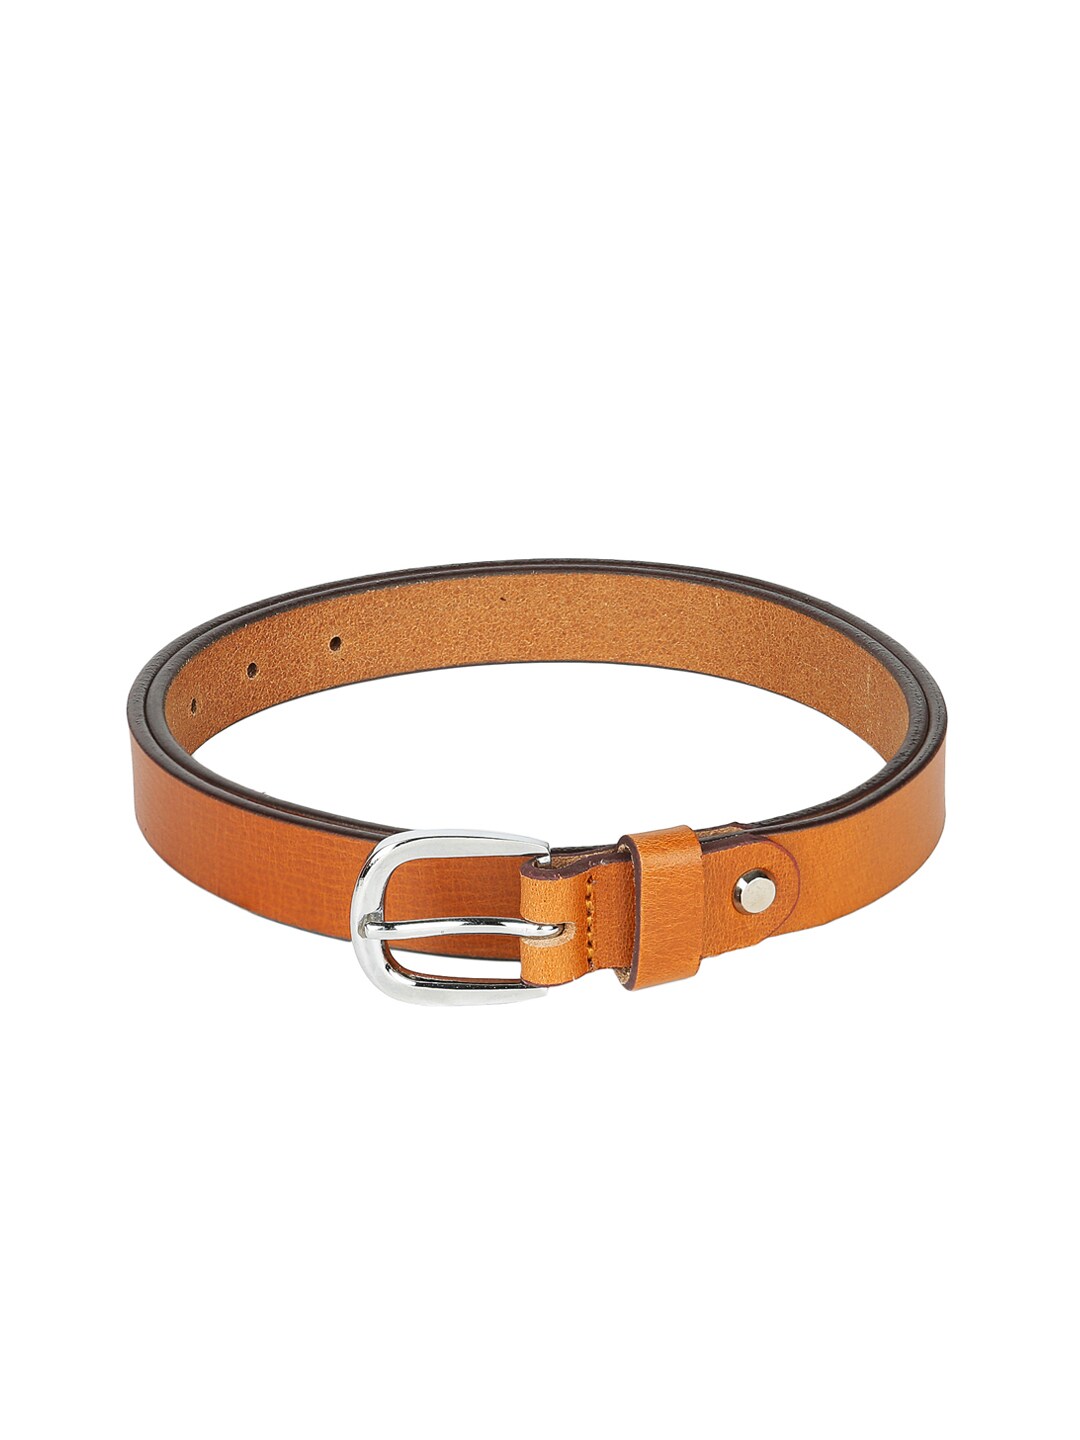 CRUSSET Women Tan Brown Leather Solid Belt Price in India